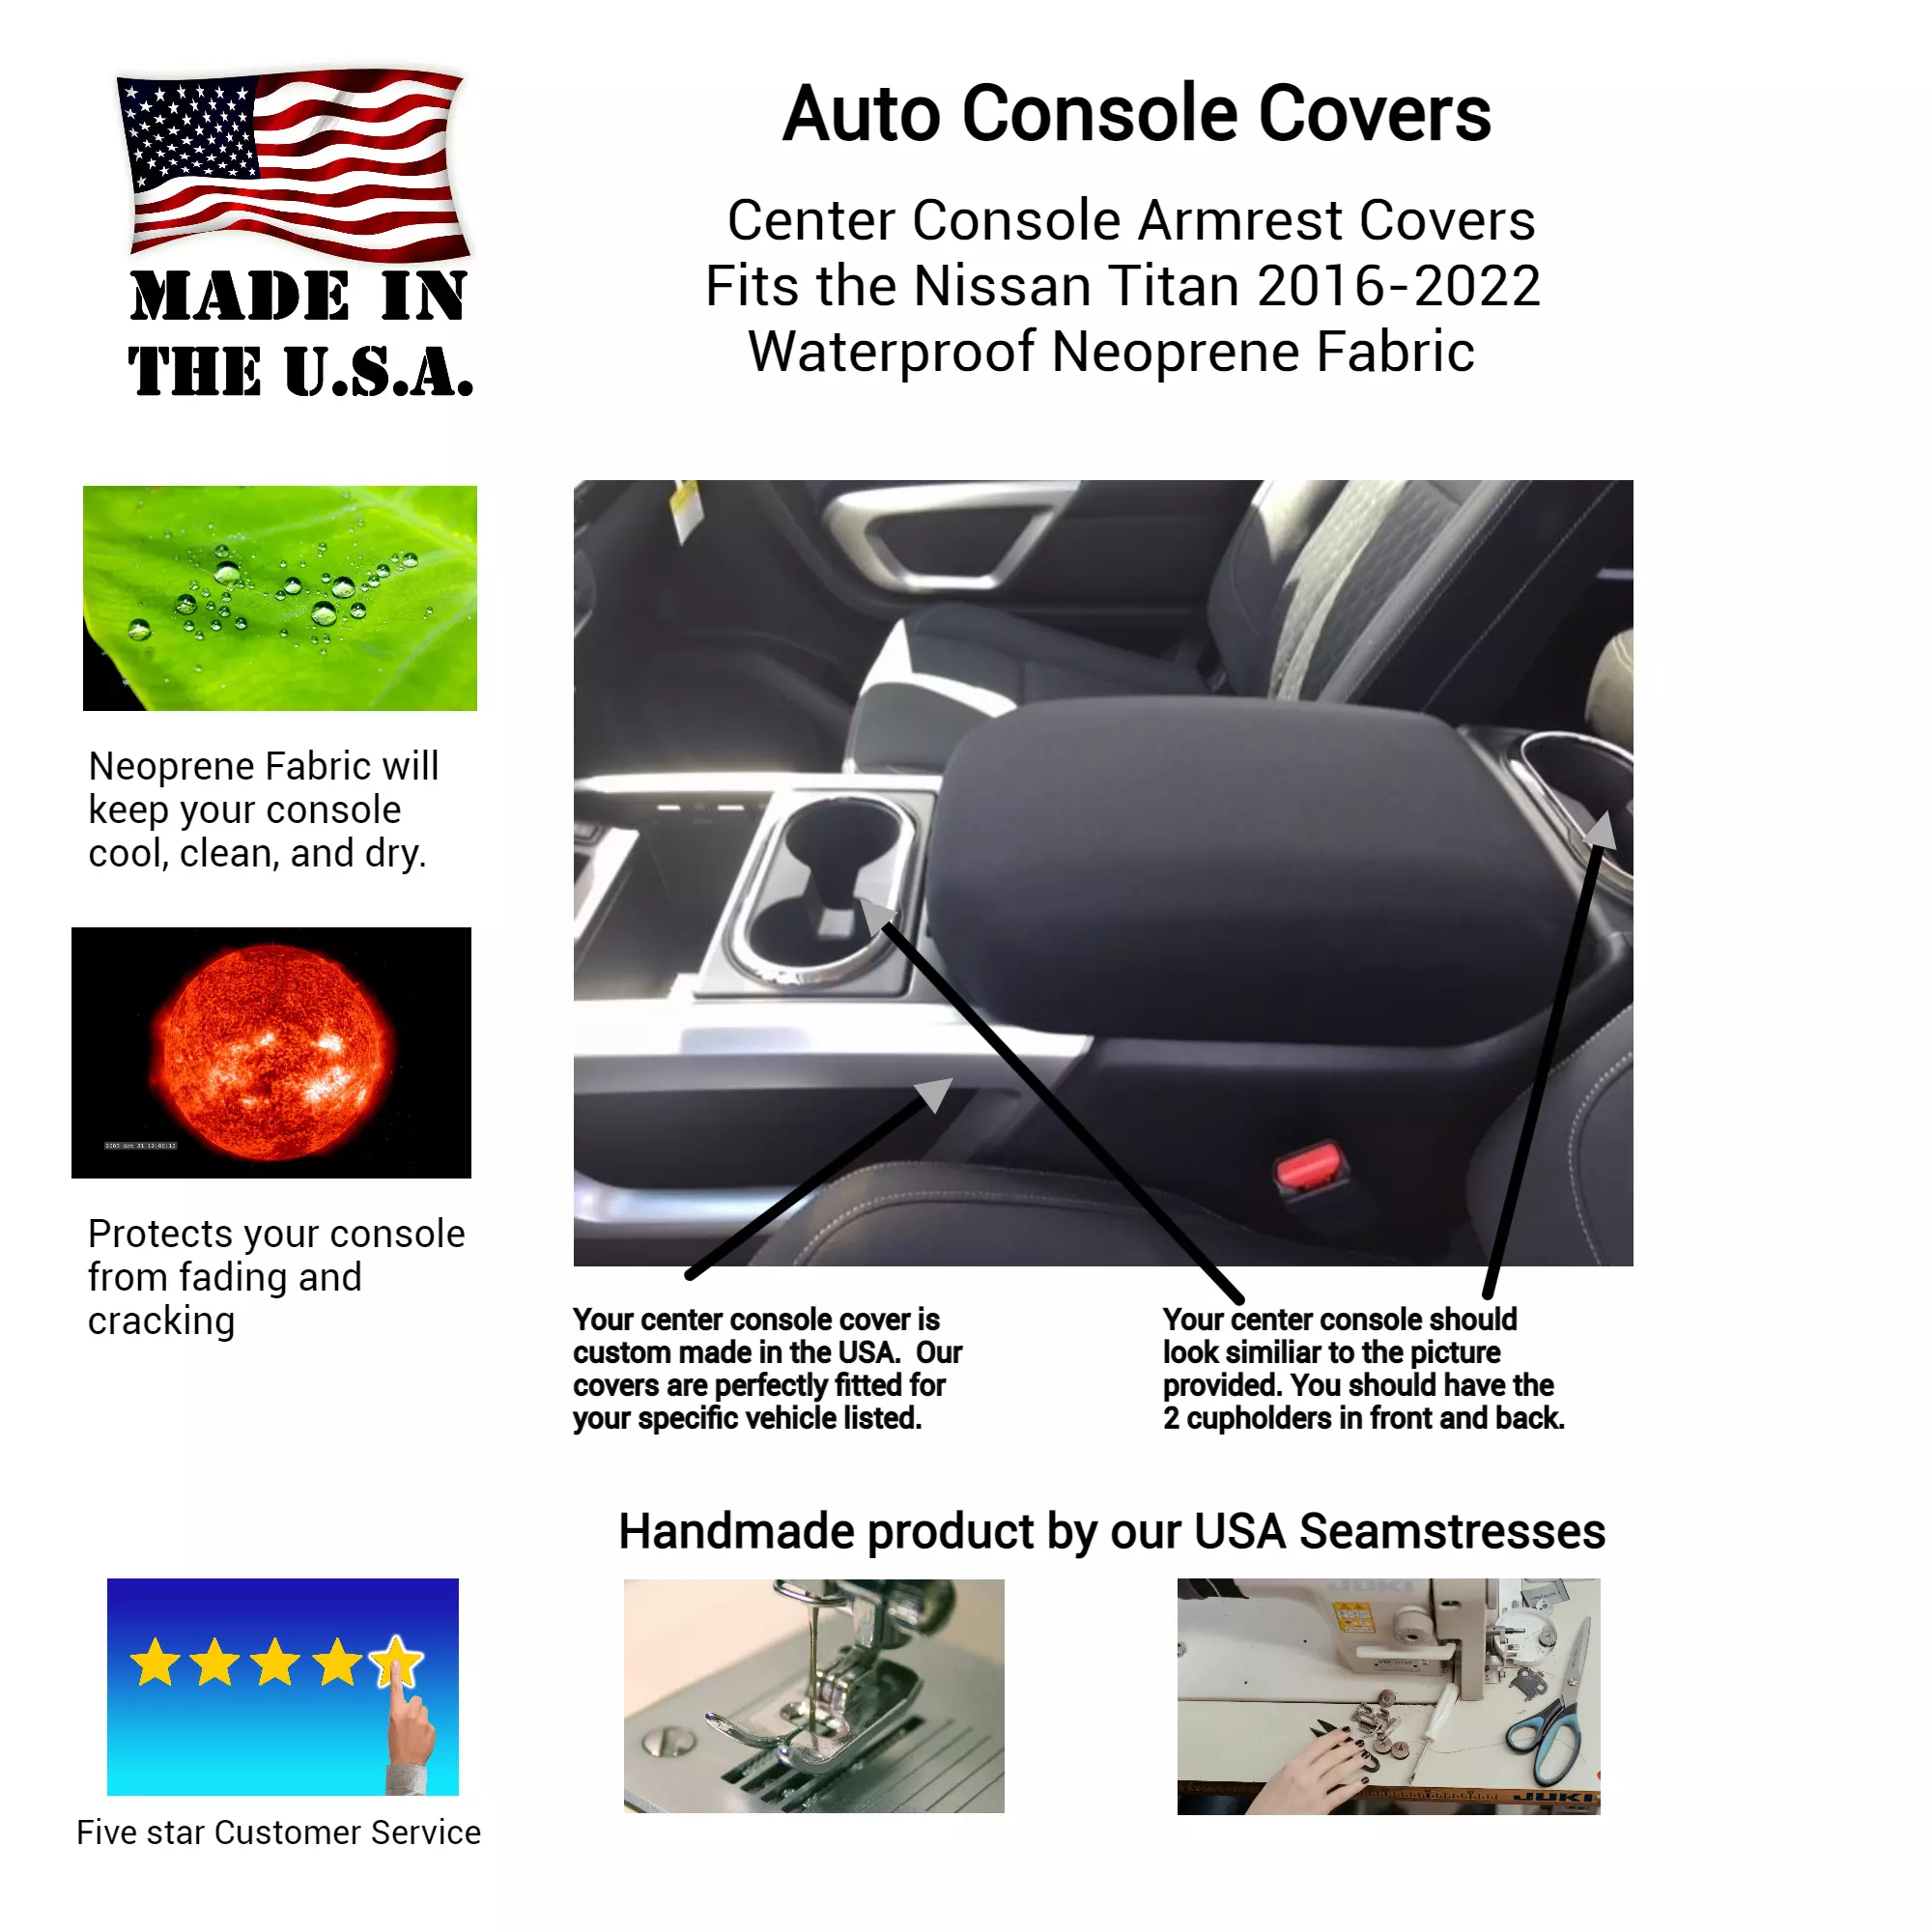 Buy Neoprene Center Console Armrest Cover - Fits the Nissan Titan 2016-2022 Waterproof Protection